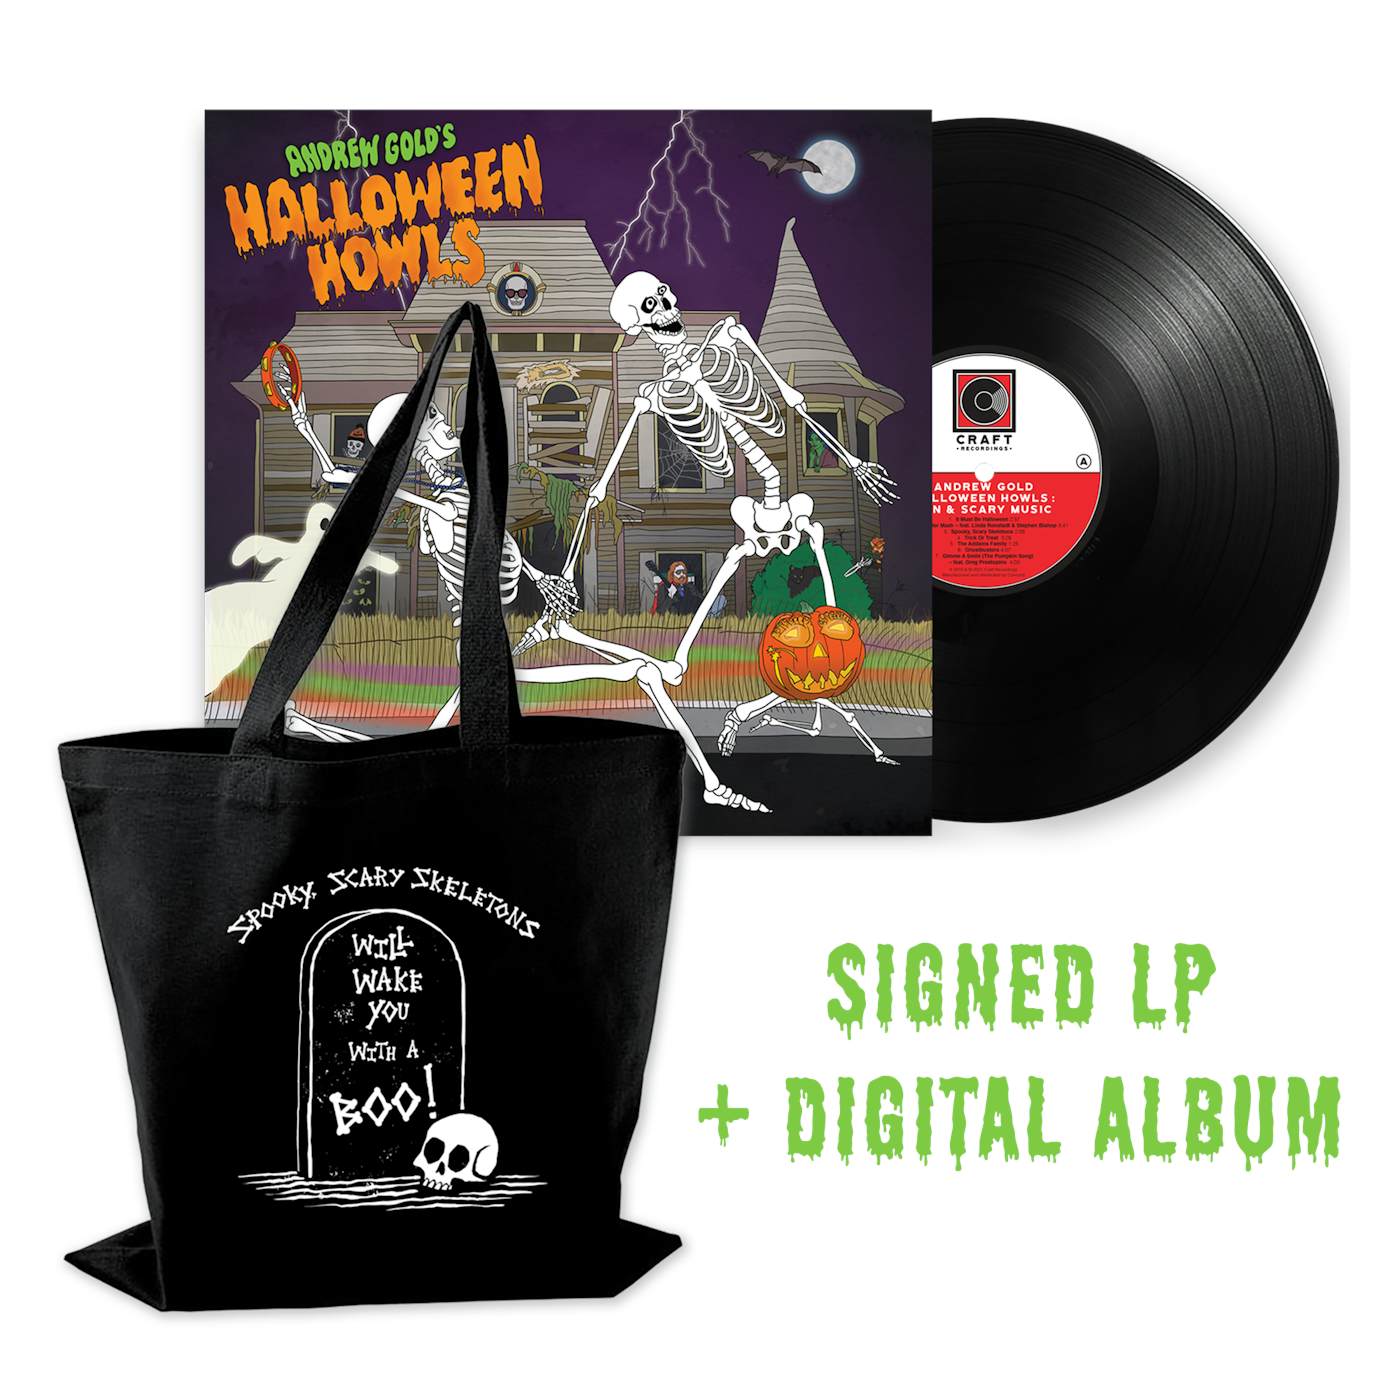 Andrew Gold Halloween Howls: Fun & Scary Music (LP - Signed by Jess Rotter + Trick or Treat Tote + Digital Album Bundle)